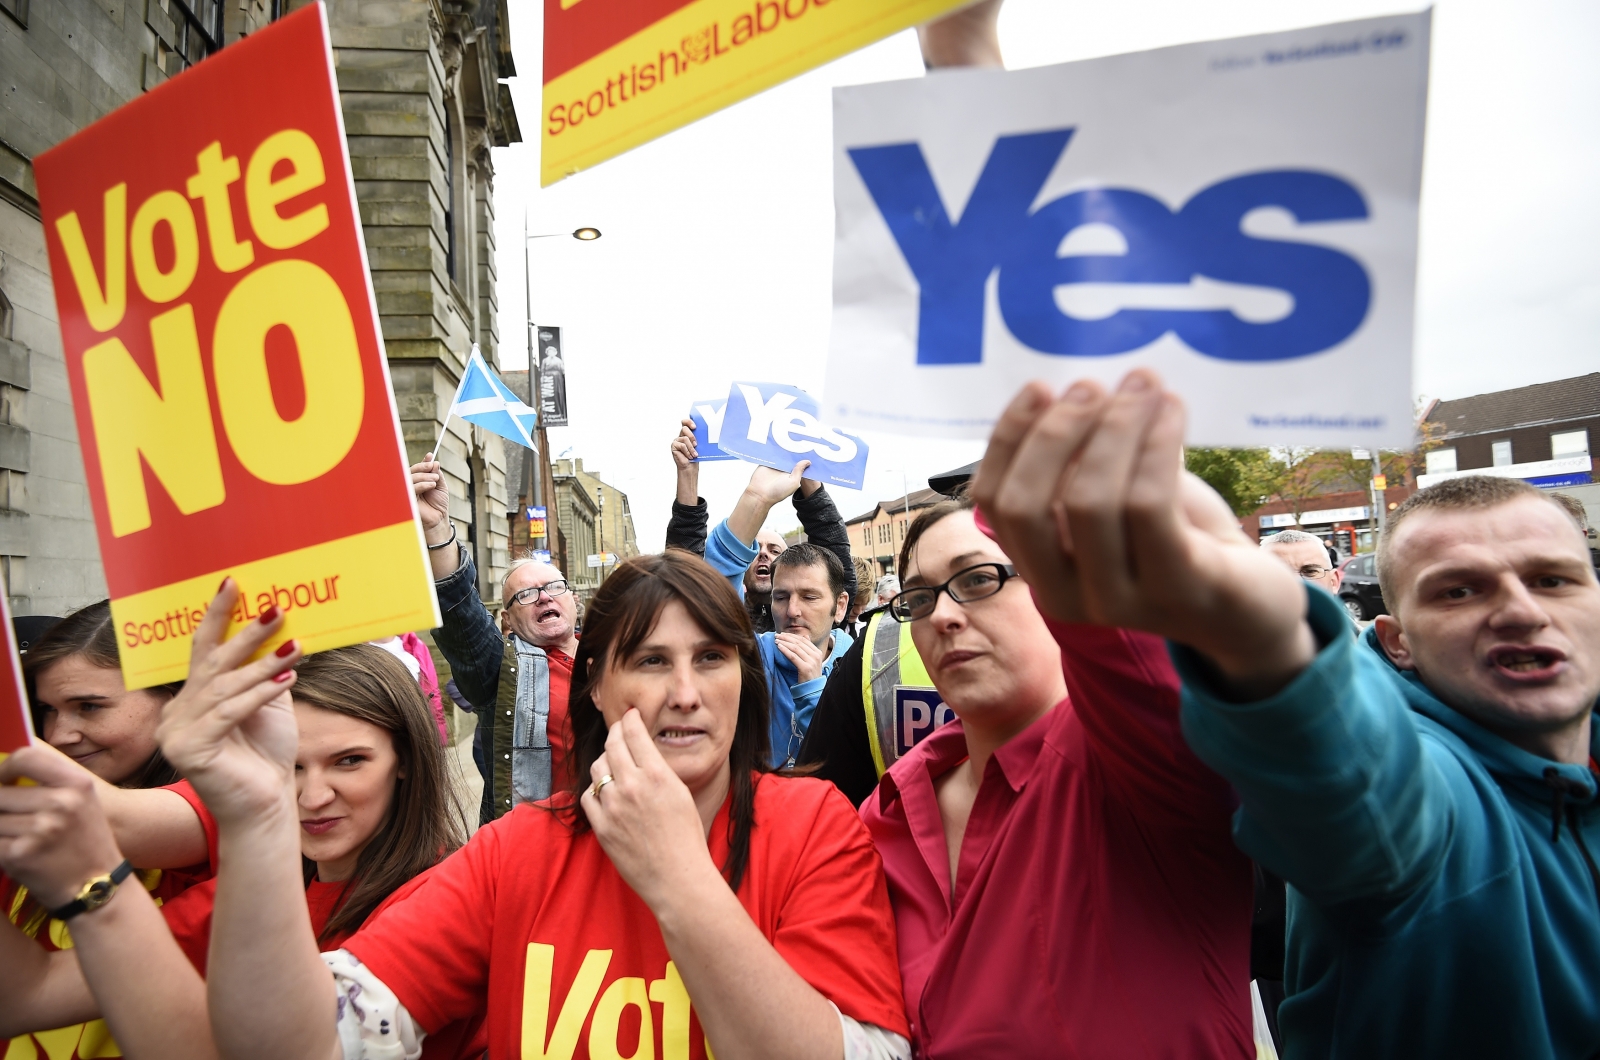 Scottish Independence Latest Poll No Vote In The Lead By Four Points